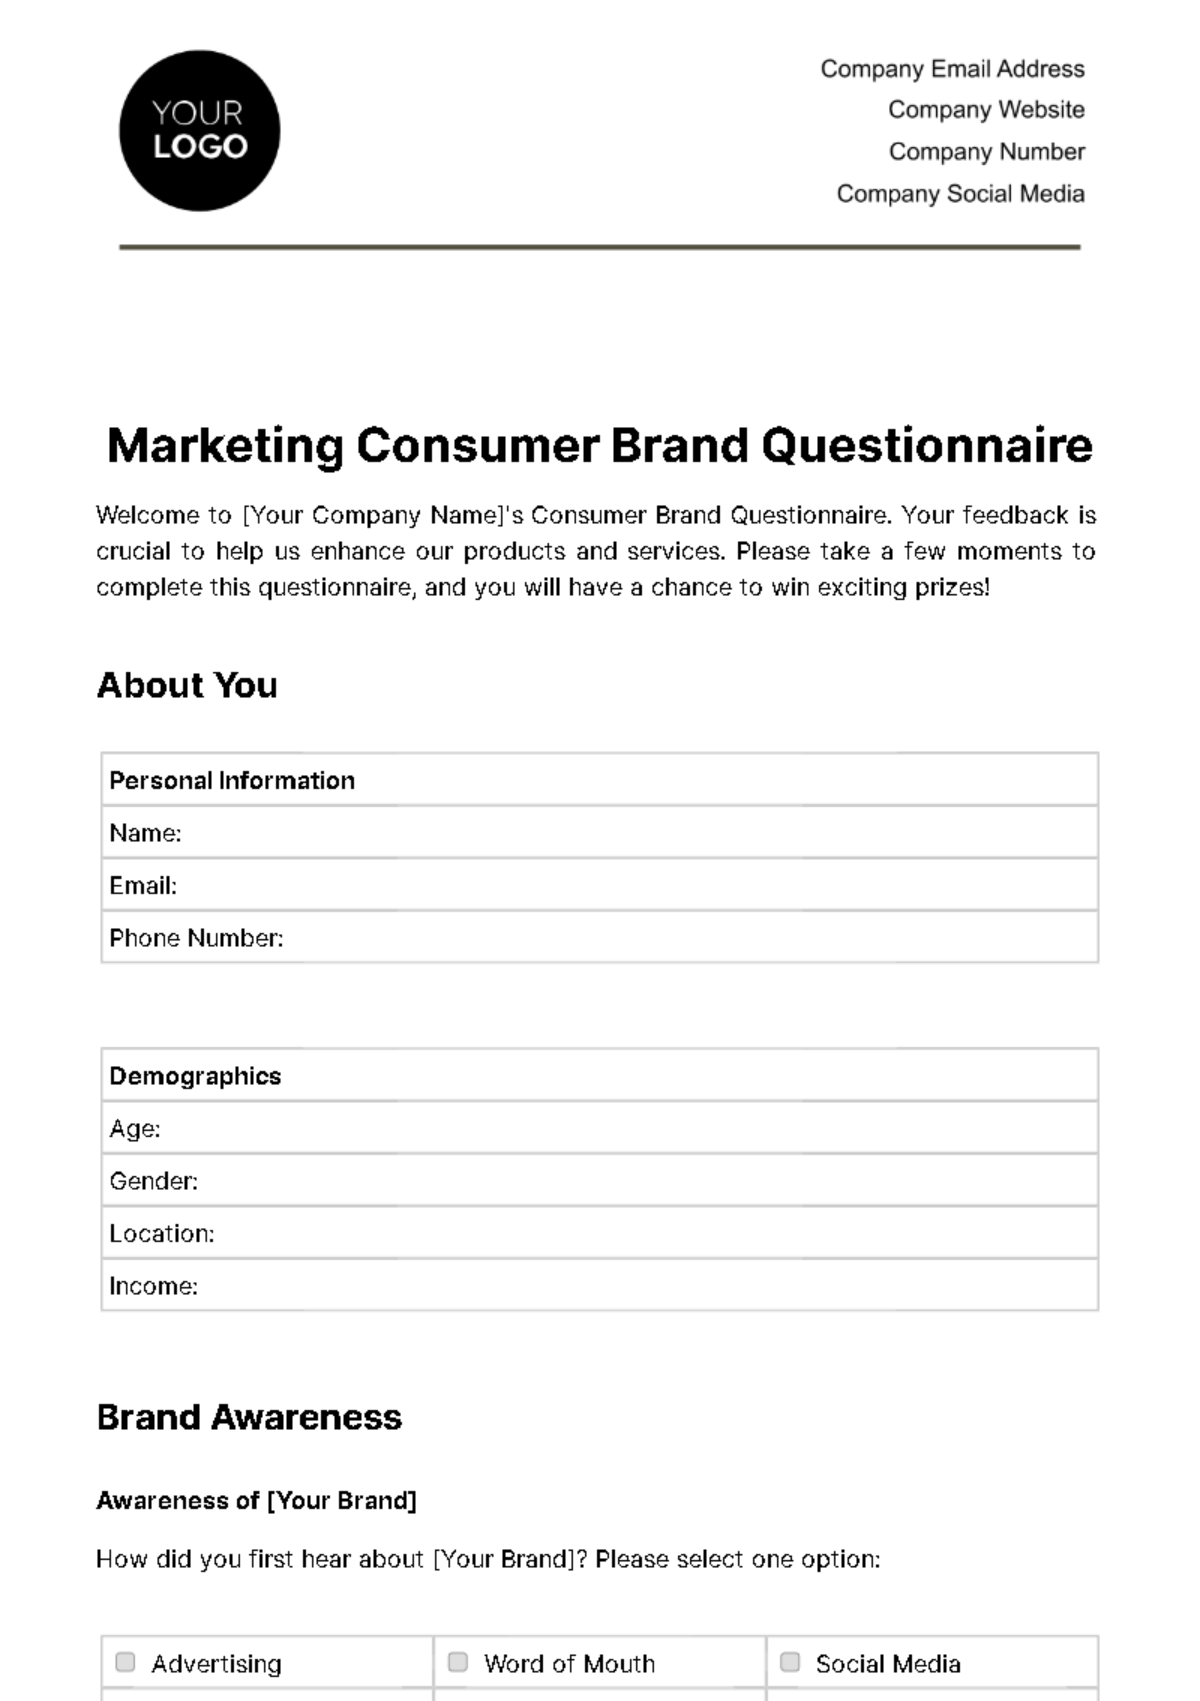 Free Marketing Consumer Brand Questionnaire Template